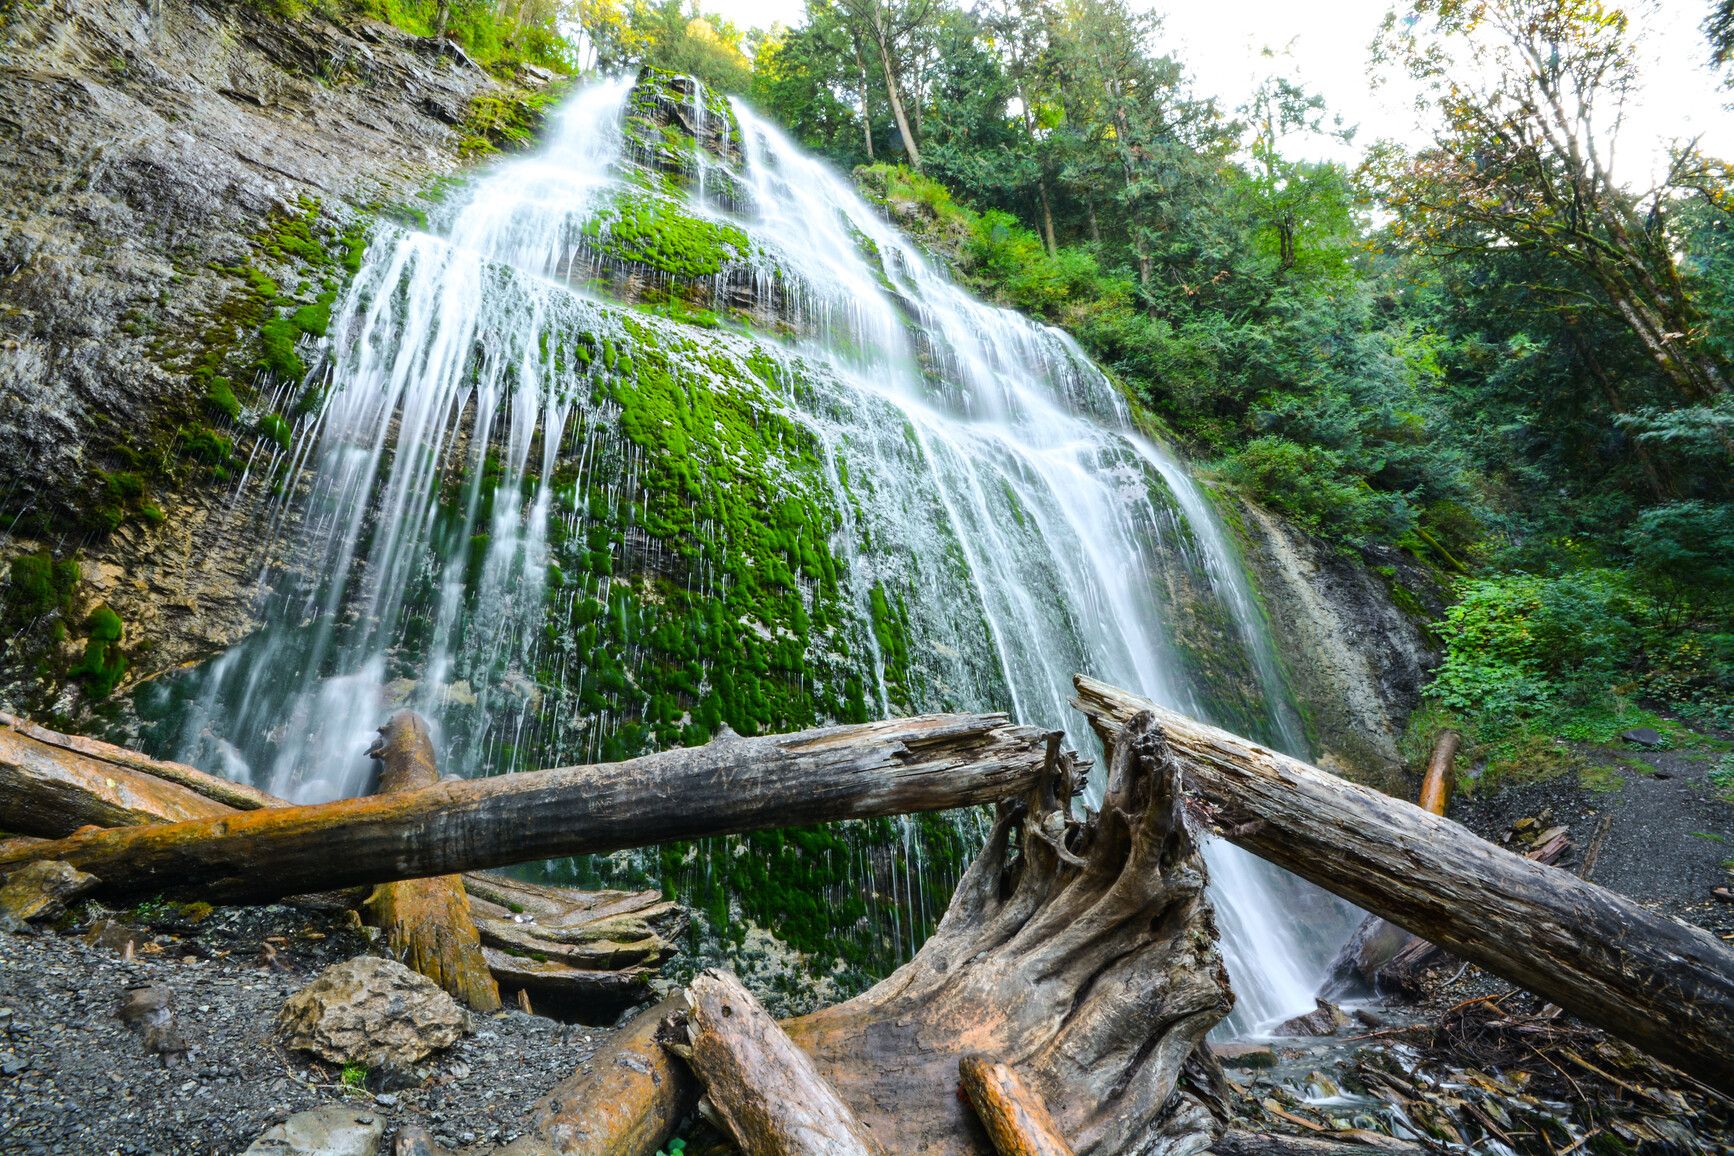 Relax and enjoy the tranquil sound of the falls cascading down the mountain in Bridal Veil Falls Park.